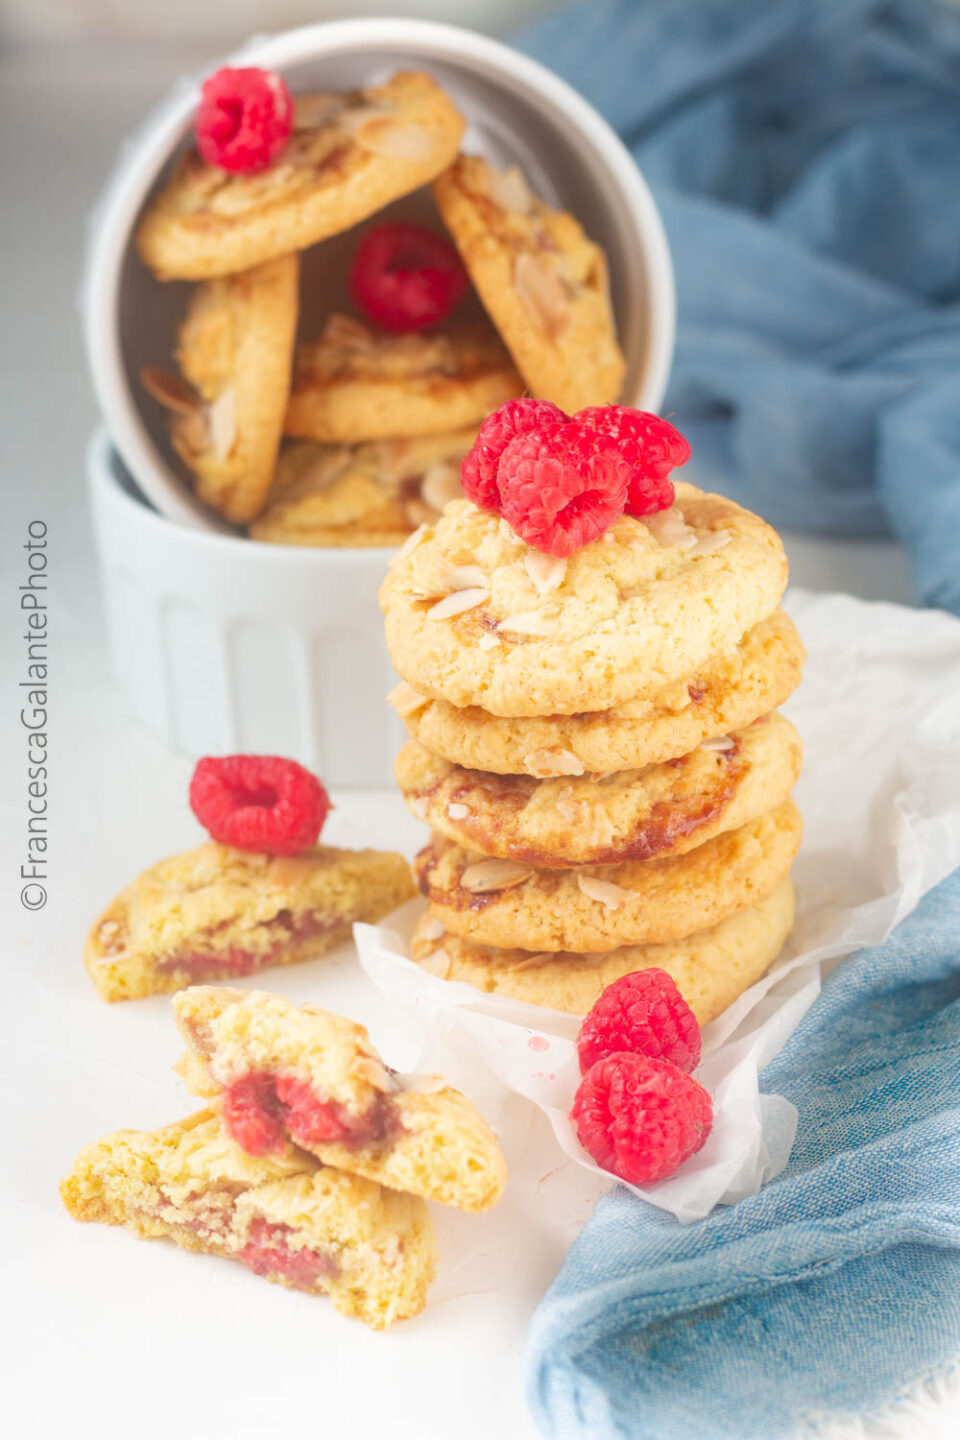 Super fast raspberries cookies with almond flakes